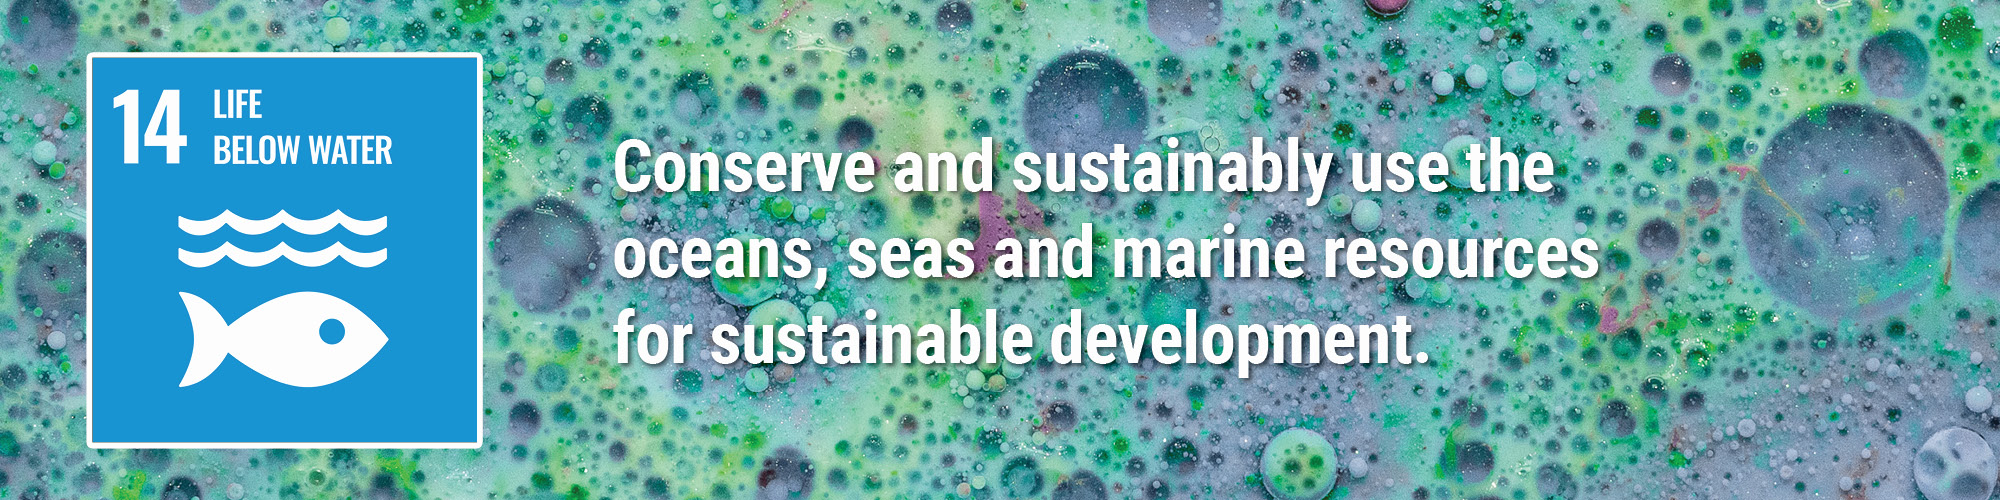 Conserve and sustainably use the oceans, seas and marine resources for sustainable development.